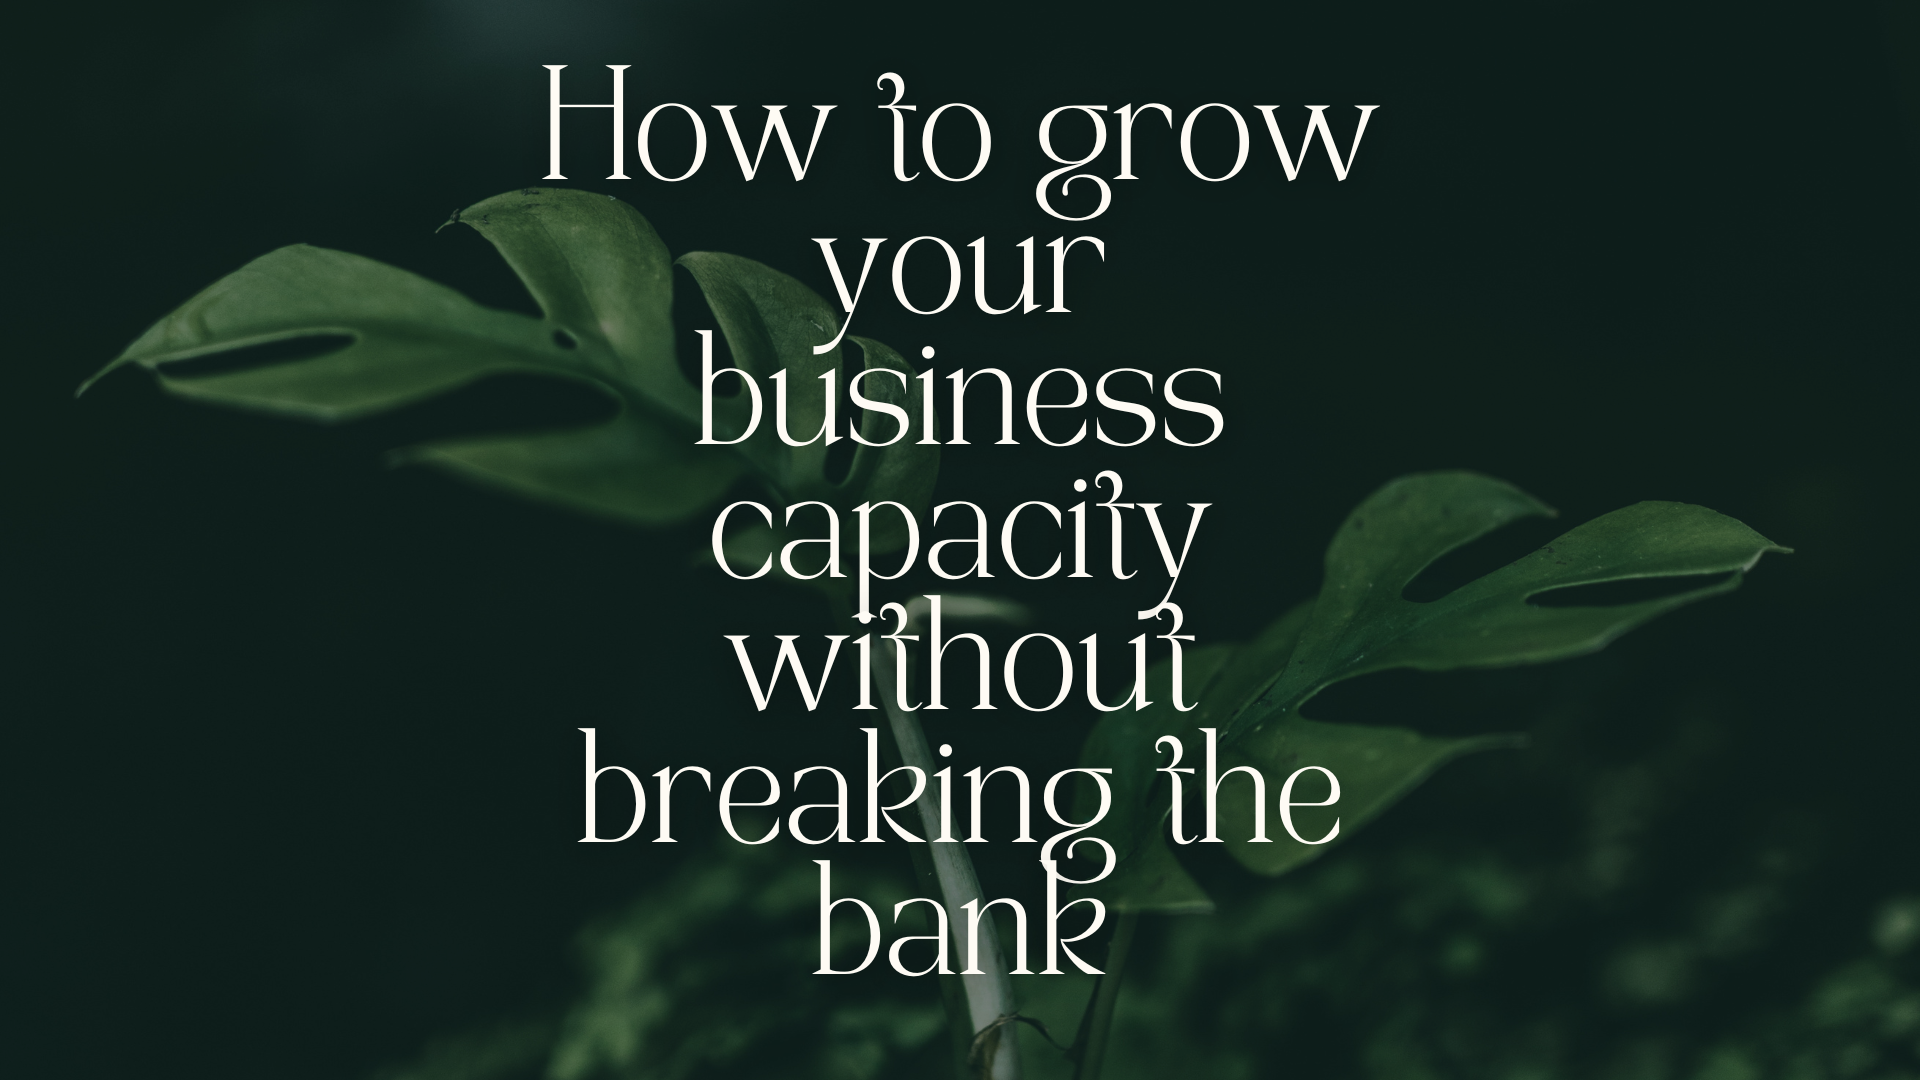 How to increase your business capacity without breaking the bank!